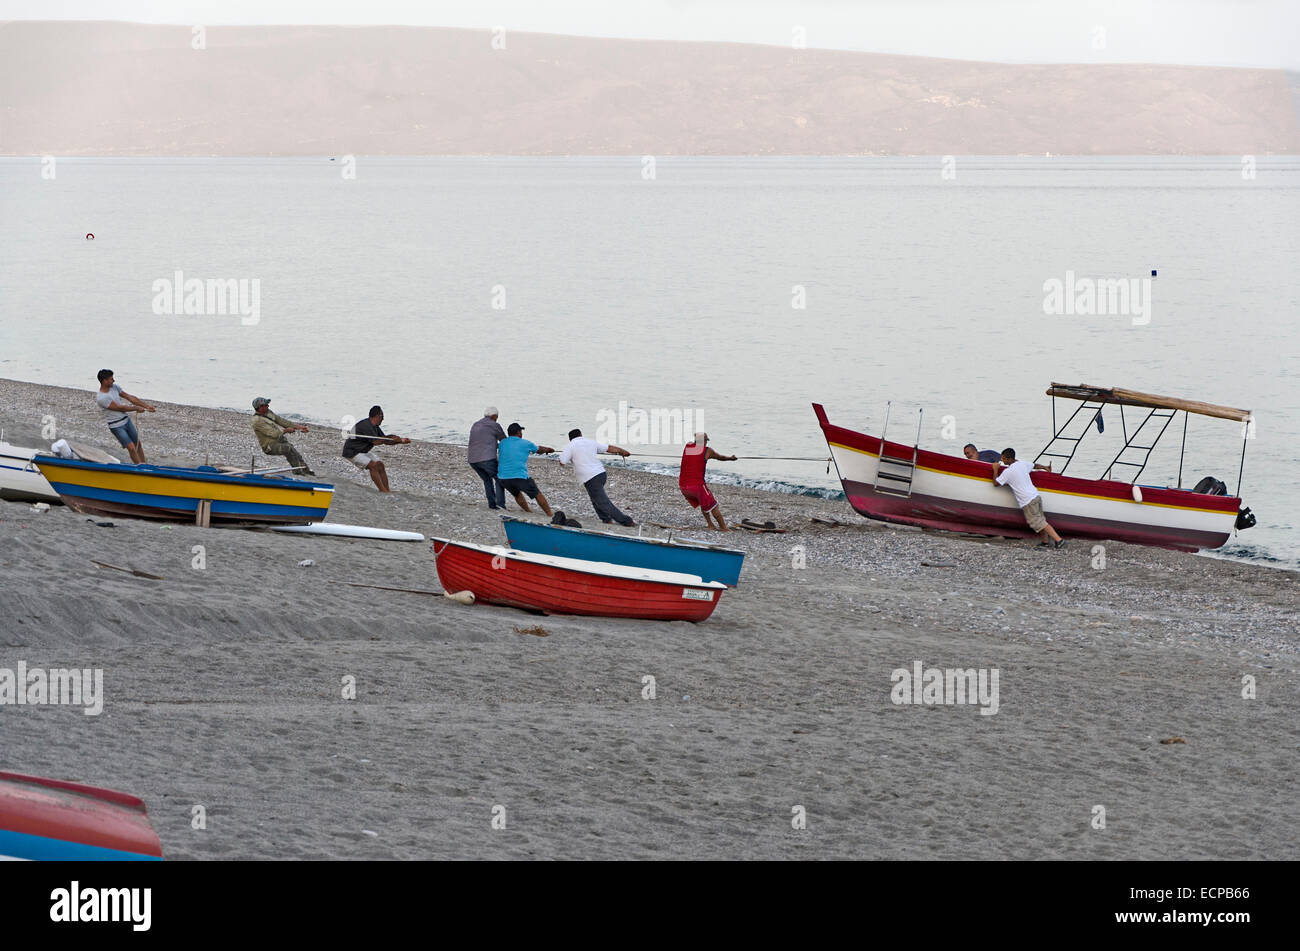 Letojanni, Sicily, Italy - September 26, 2012: Fishermen pulling fishing boat out from sea to start selling their caught fish at Stock Photo